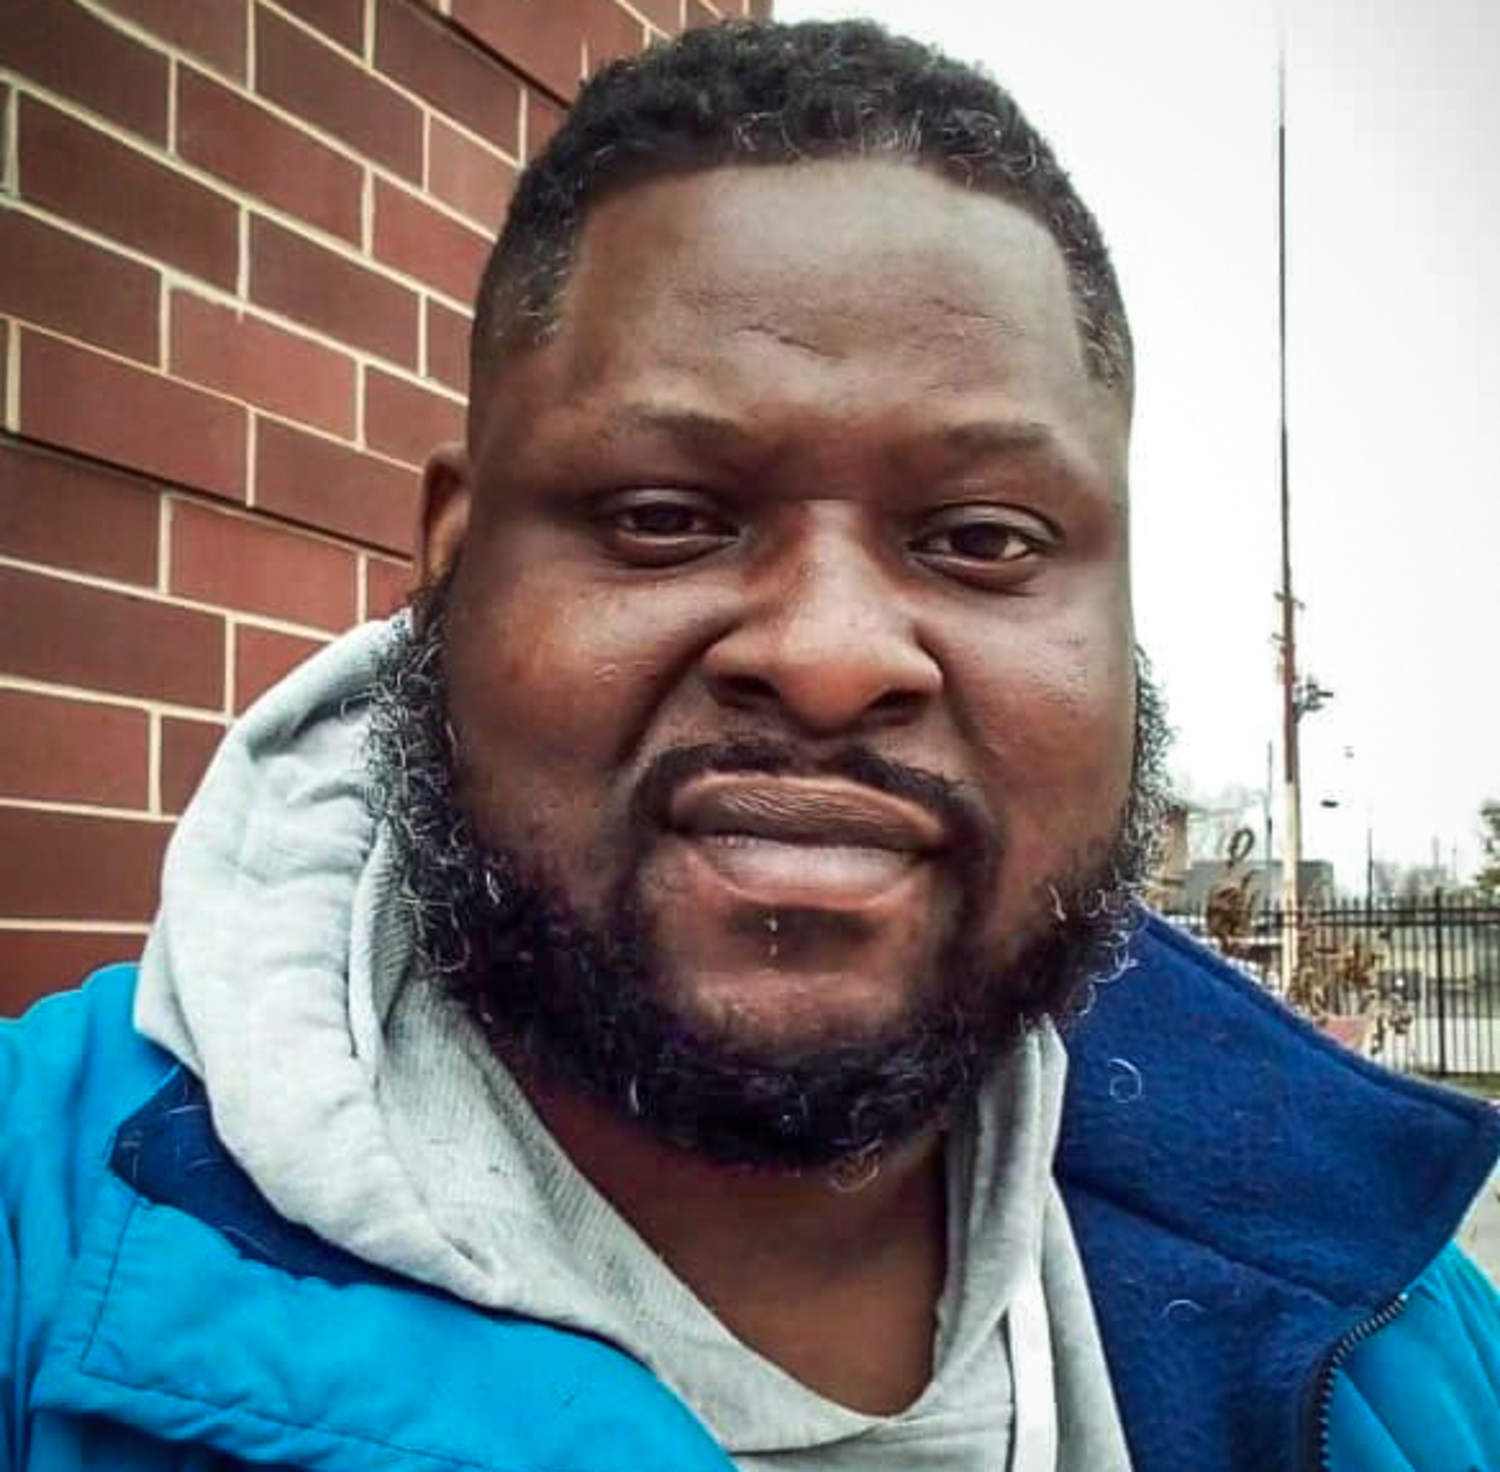 Police refer criminal charges in death of Black man pinned to the ground by Milwaukee hotel security guards